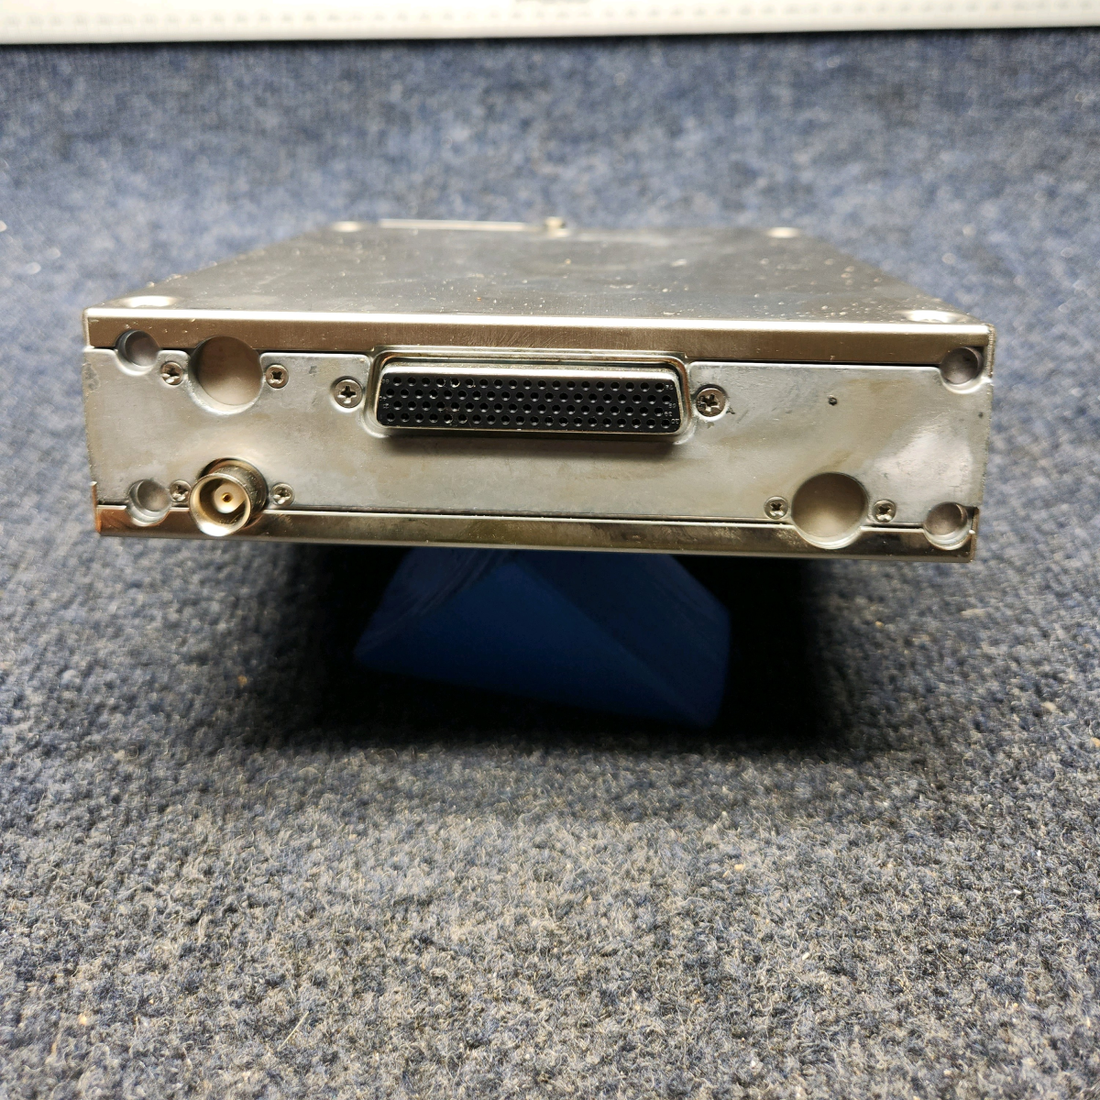 Used aircraft parts for sale, 011-02369-00 As Removed working when removed, Sold with tray and connector. PIPIR PA32RT-300 GARMIN GDL 88 DUAL LINK ADS-B IN/OUT MOUNTING TRAY AND CONNECTORS